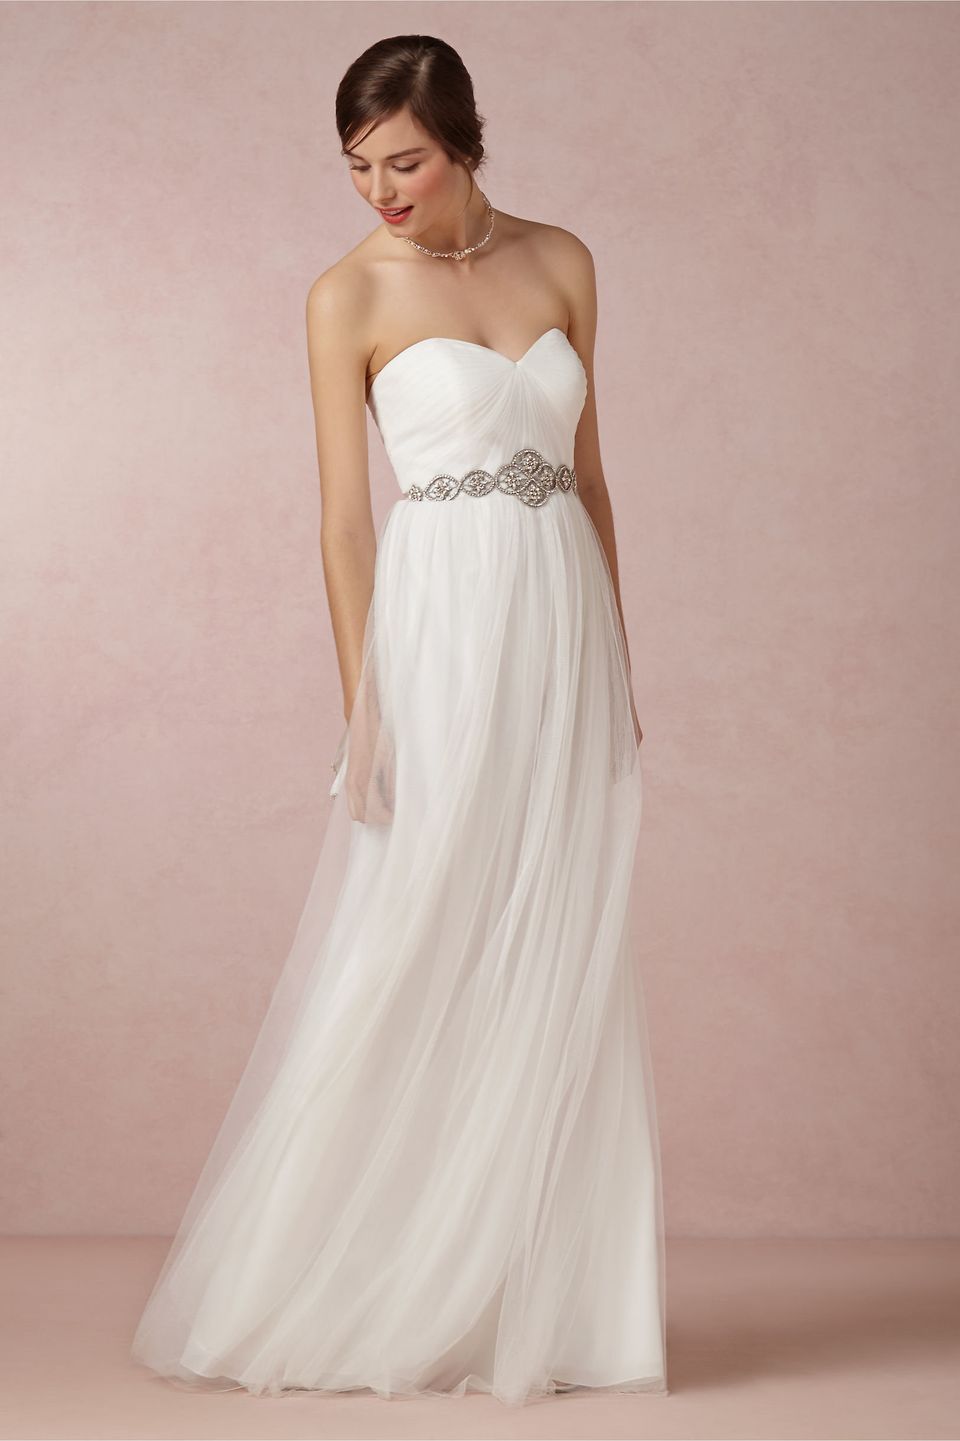 Strapless Dress With Sweetheart Neckline